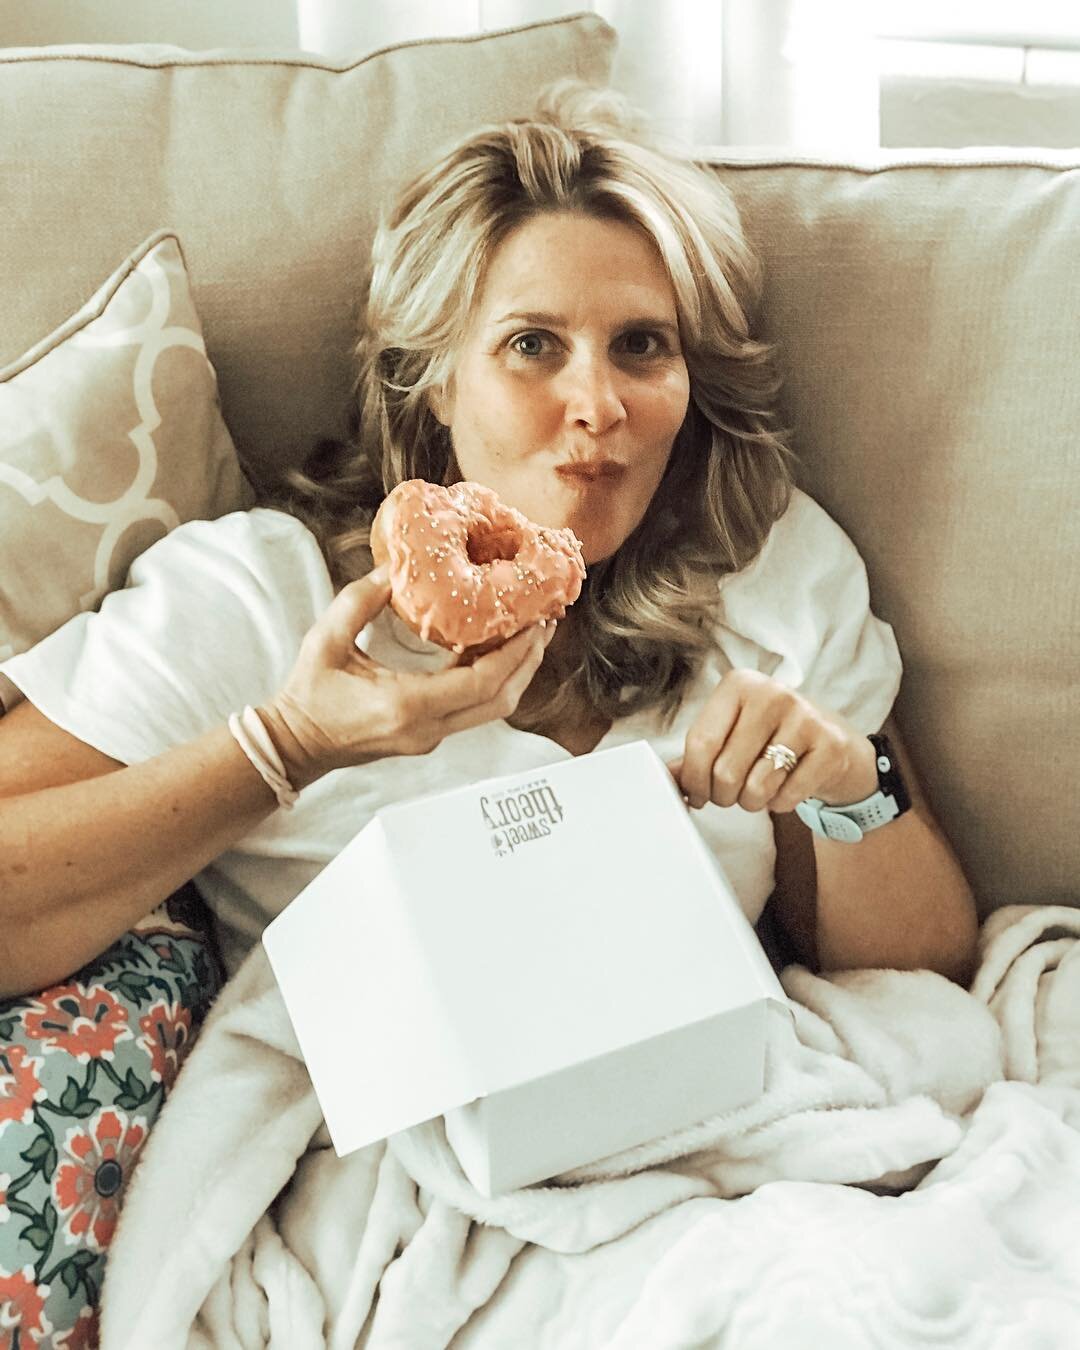 What this Doula does after a beautiful birth....Devours my favorite donut from @sweettheorybakingco!
.
.
.
.
.
.
#birthingwithjane #doula #birthworker #laborcompanion #riverside @jaxhealth